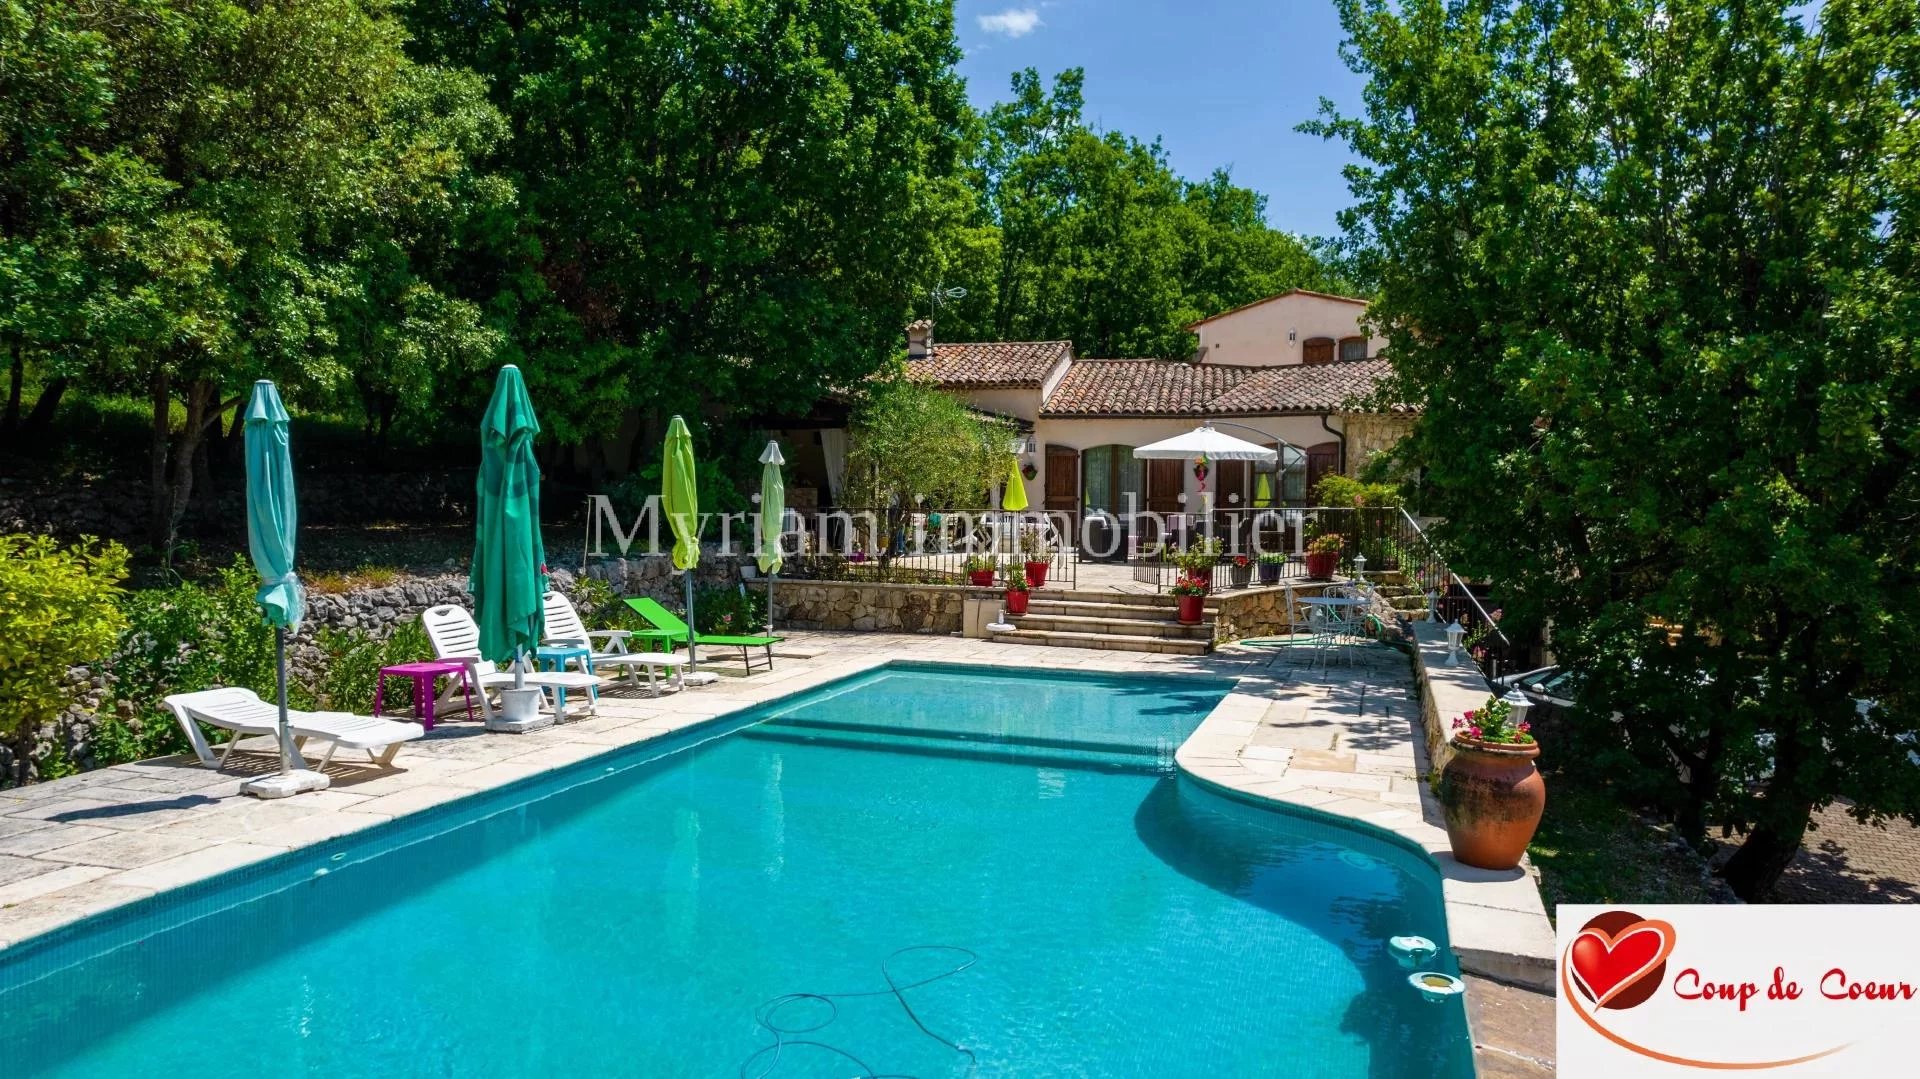 6 room villa with pool in St CEZAIRE